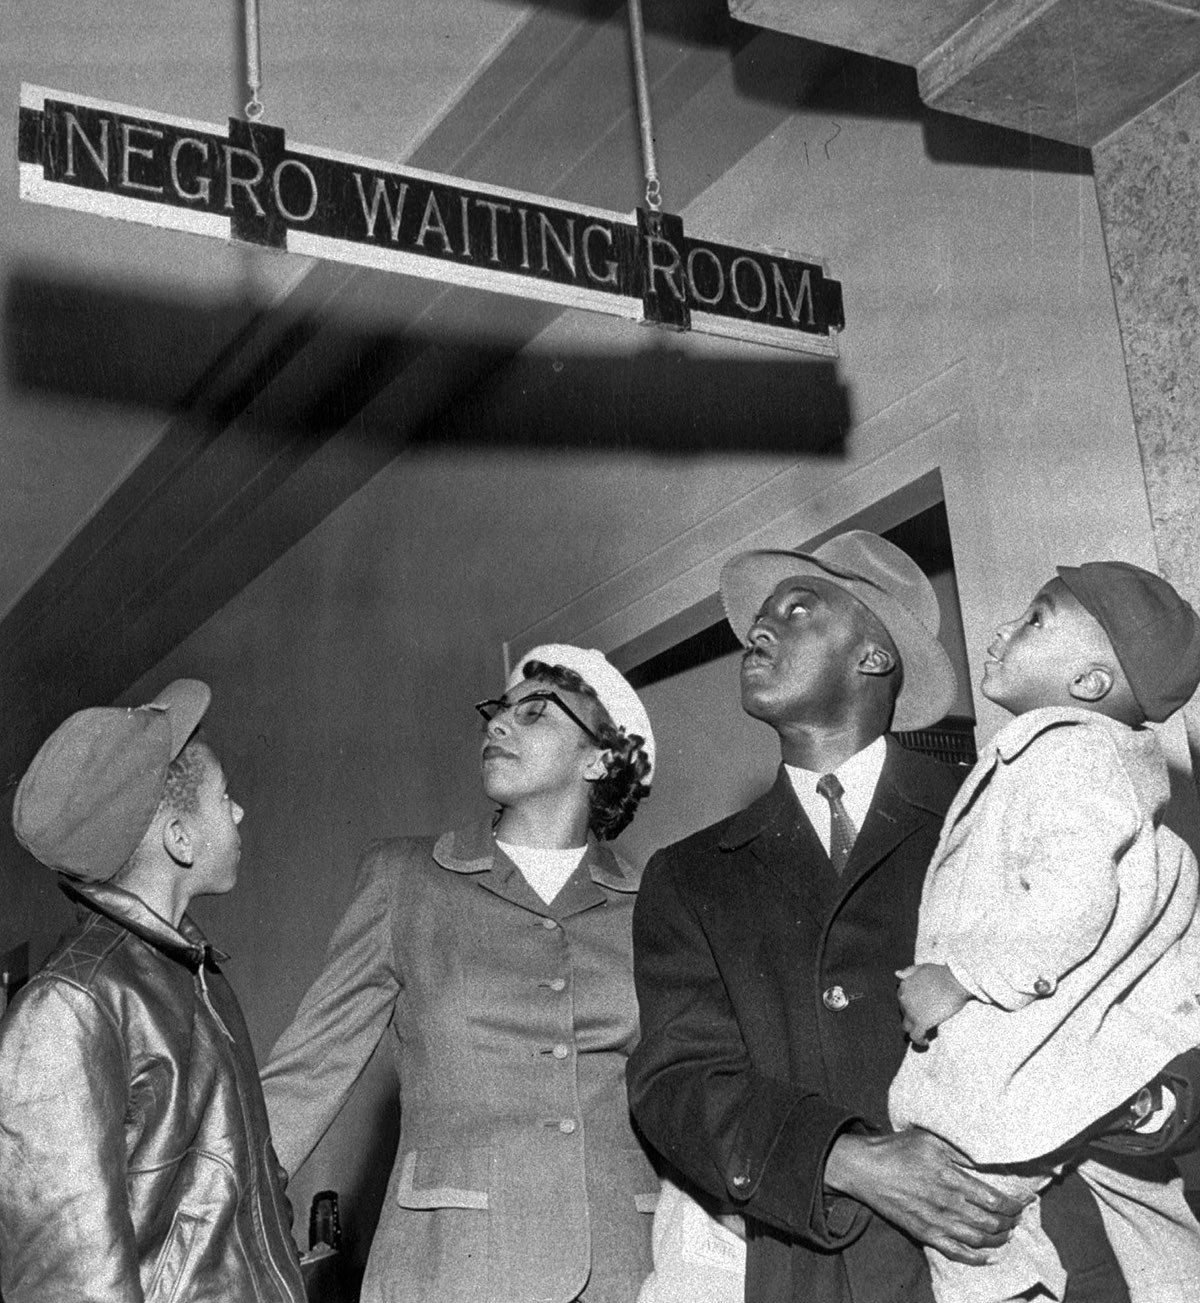 Dr. and Mrs. Charles N. Atkins of Oklahoma City, Oklahoma, and their sons, Edmond, 10, and Charles, 3, pause for a glance at the Santa Fe Depot segregation sign on Nov. 25, 1955.